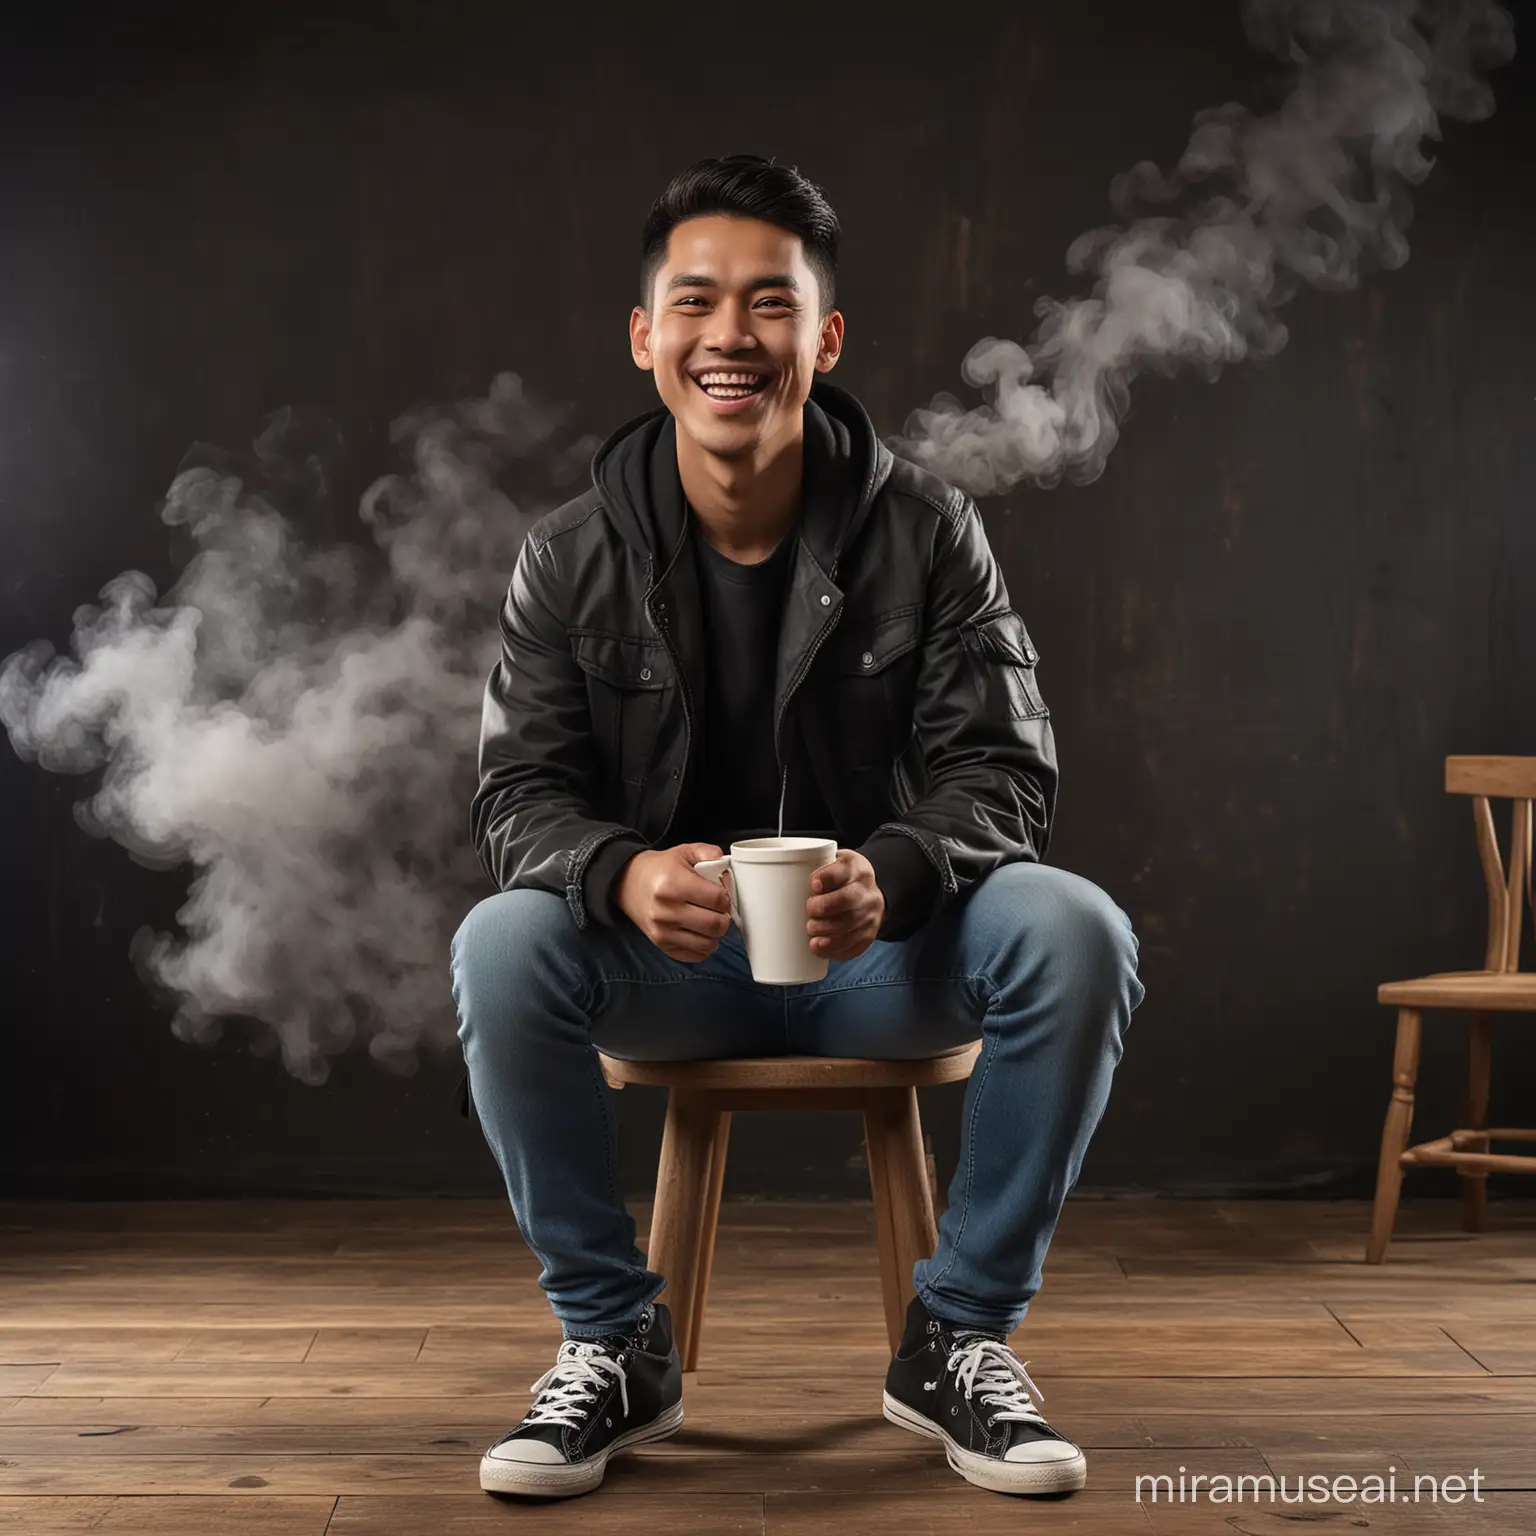 Realist 3D caricature, a young man, Indonesian face, wearing a black jacket, wearing jeans, wearing sneakers, sitting on a wooden chair, smiling, while carrying a cup of warm coffee, smoke effect, black rustic photography background, UHD, Hasselblad X1D II&nbsp; 50c Camera, iso 200